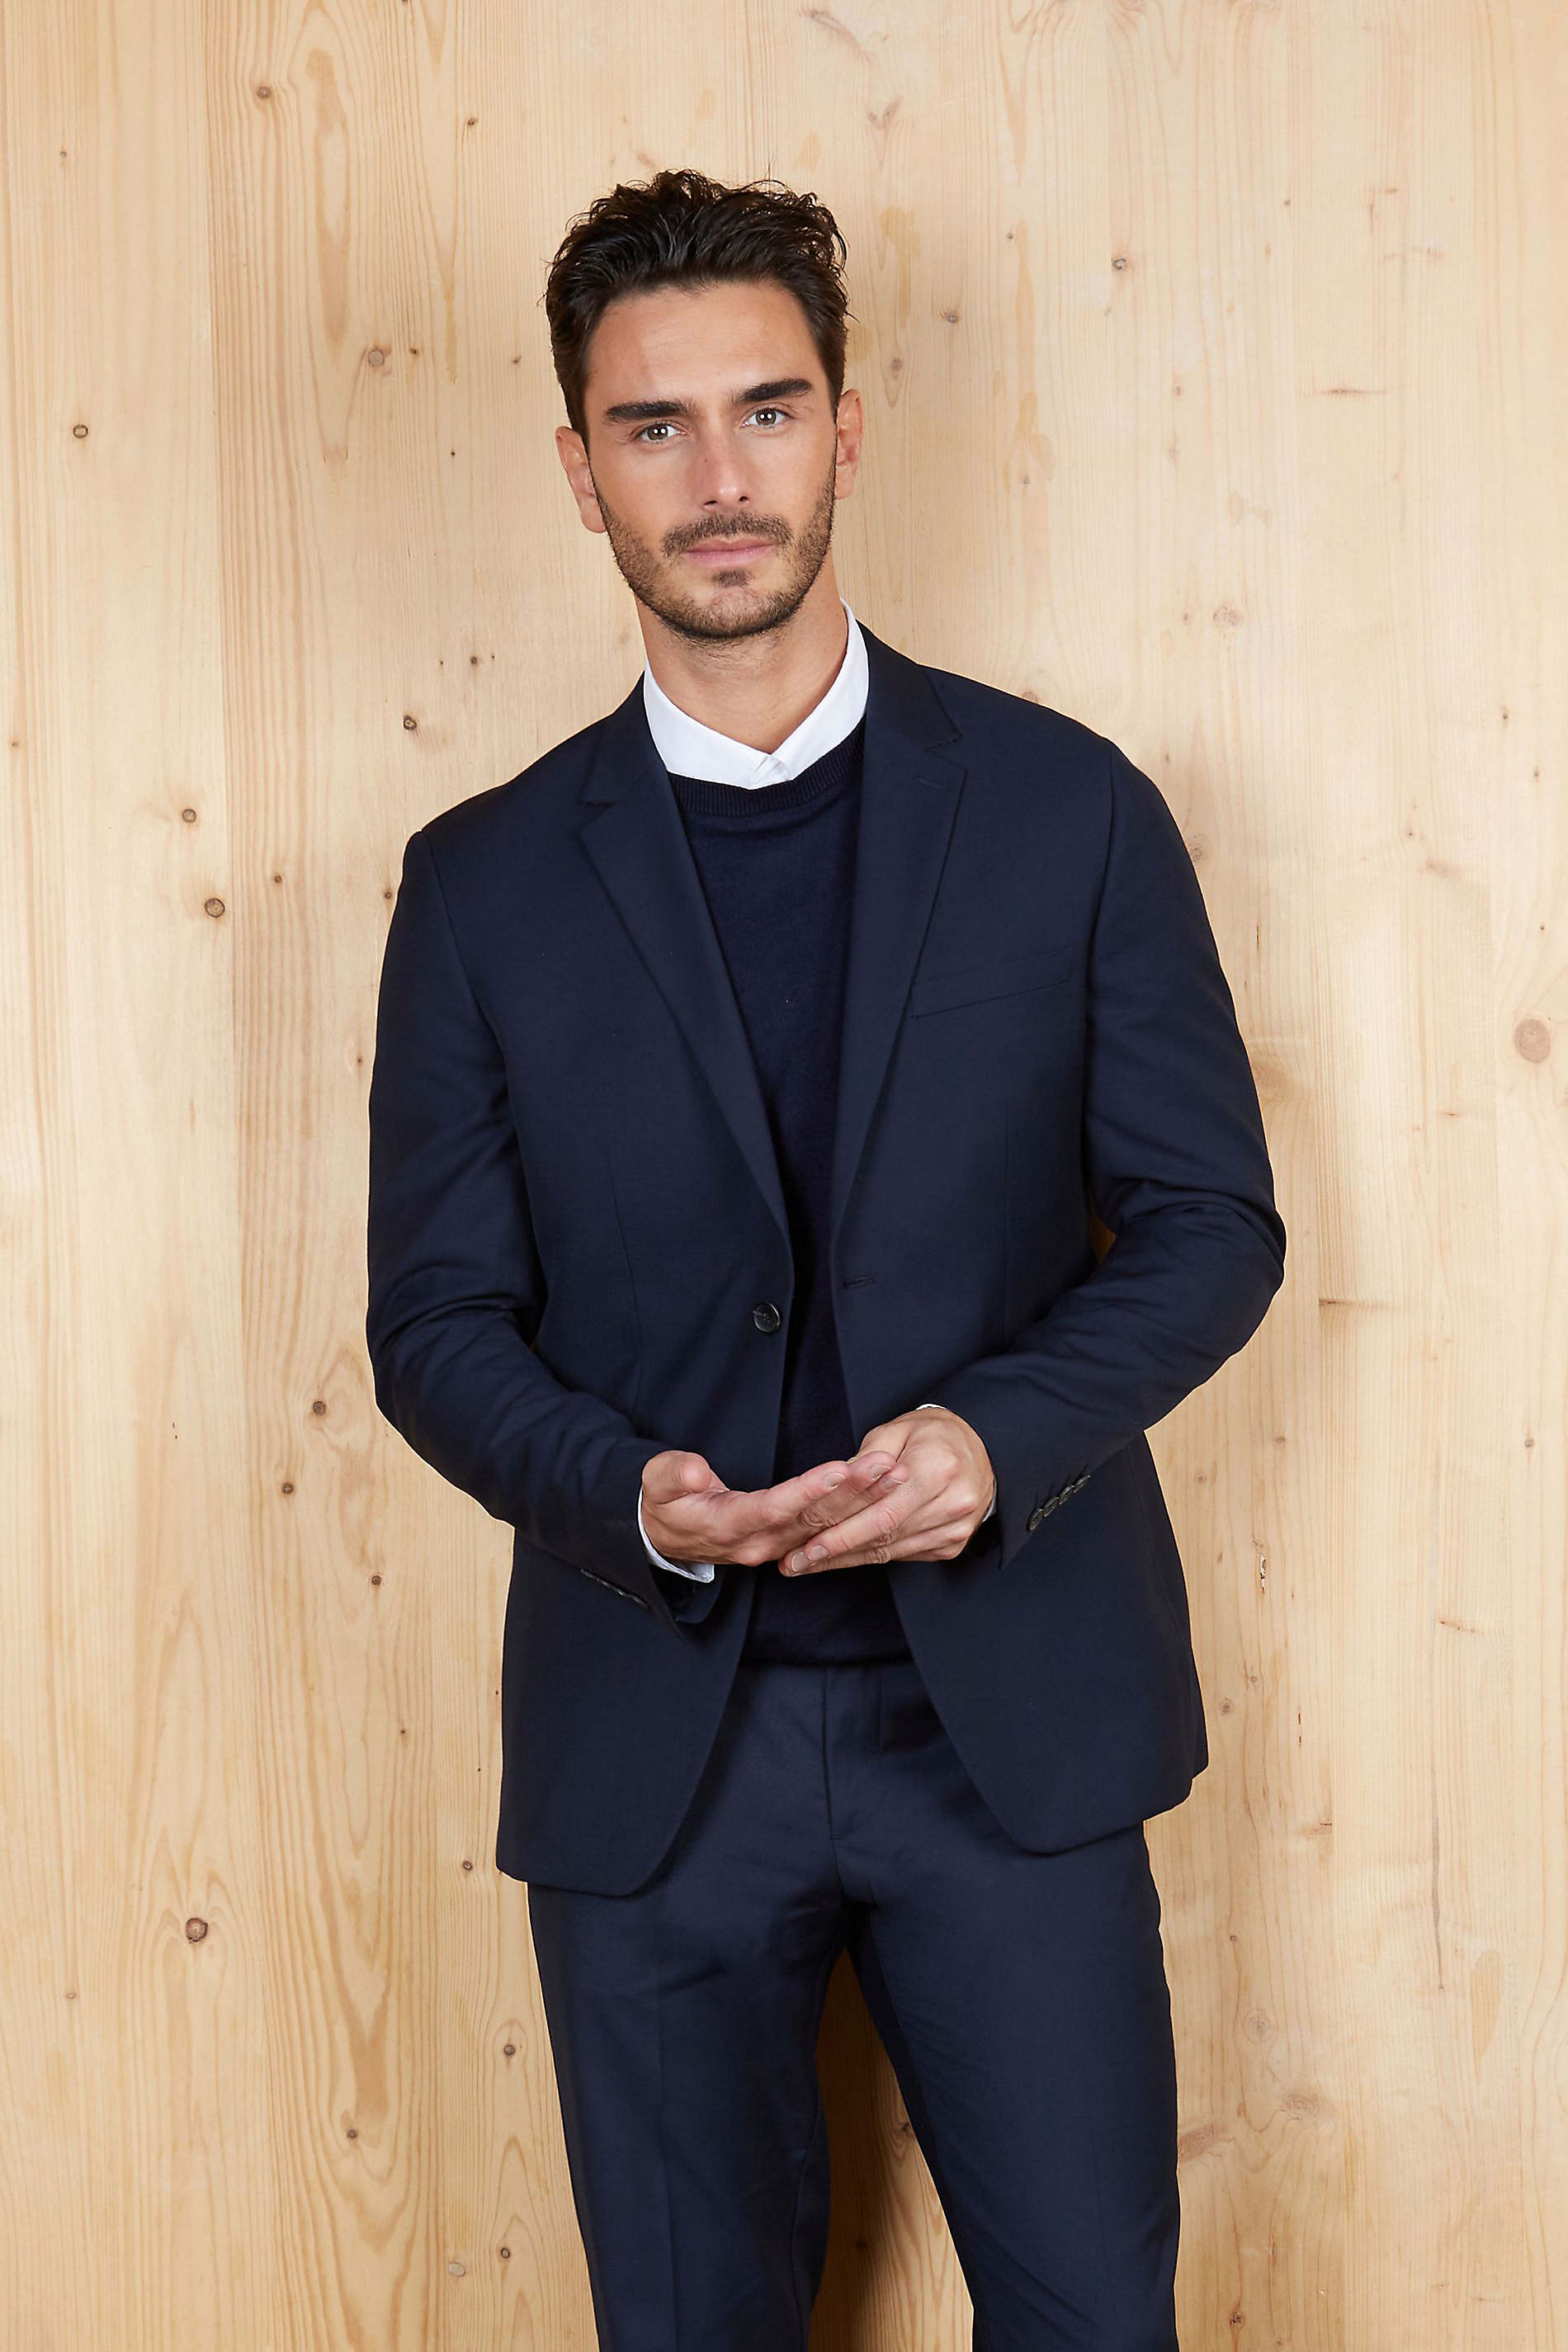 MEN'S SUIT JACKET<br/><p>This elegant, timeless, mid-season suit jacket is an iconic garment and a staple of men's wardrobe. It can be worn as a part of a three-piece suit for formal events or with chinos for a casual style.</p> NEOBLU MARIUS MEN